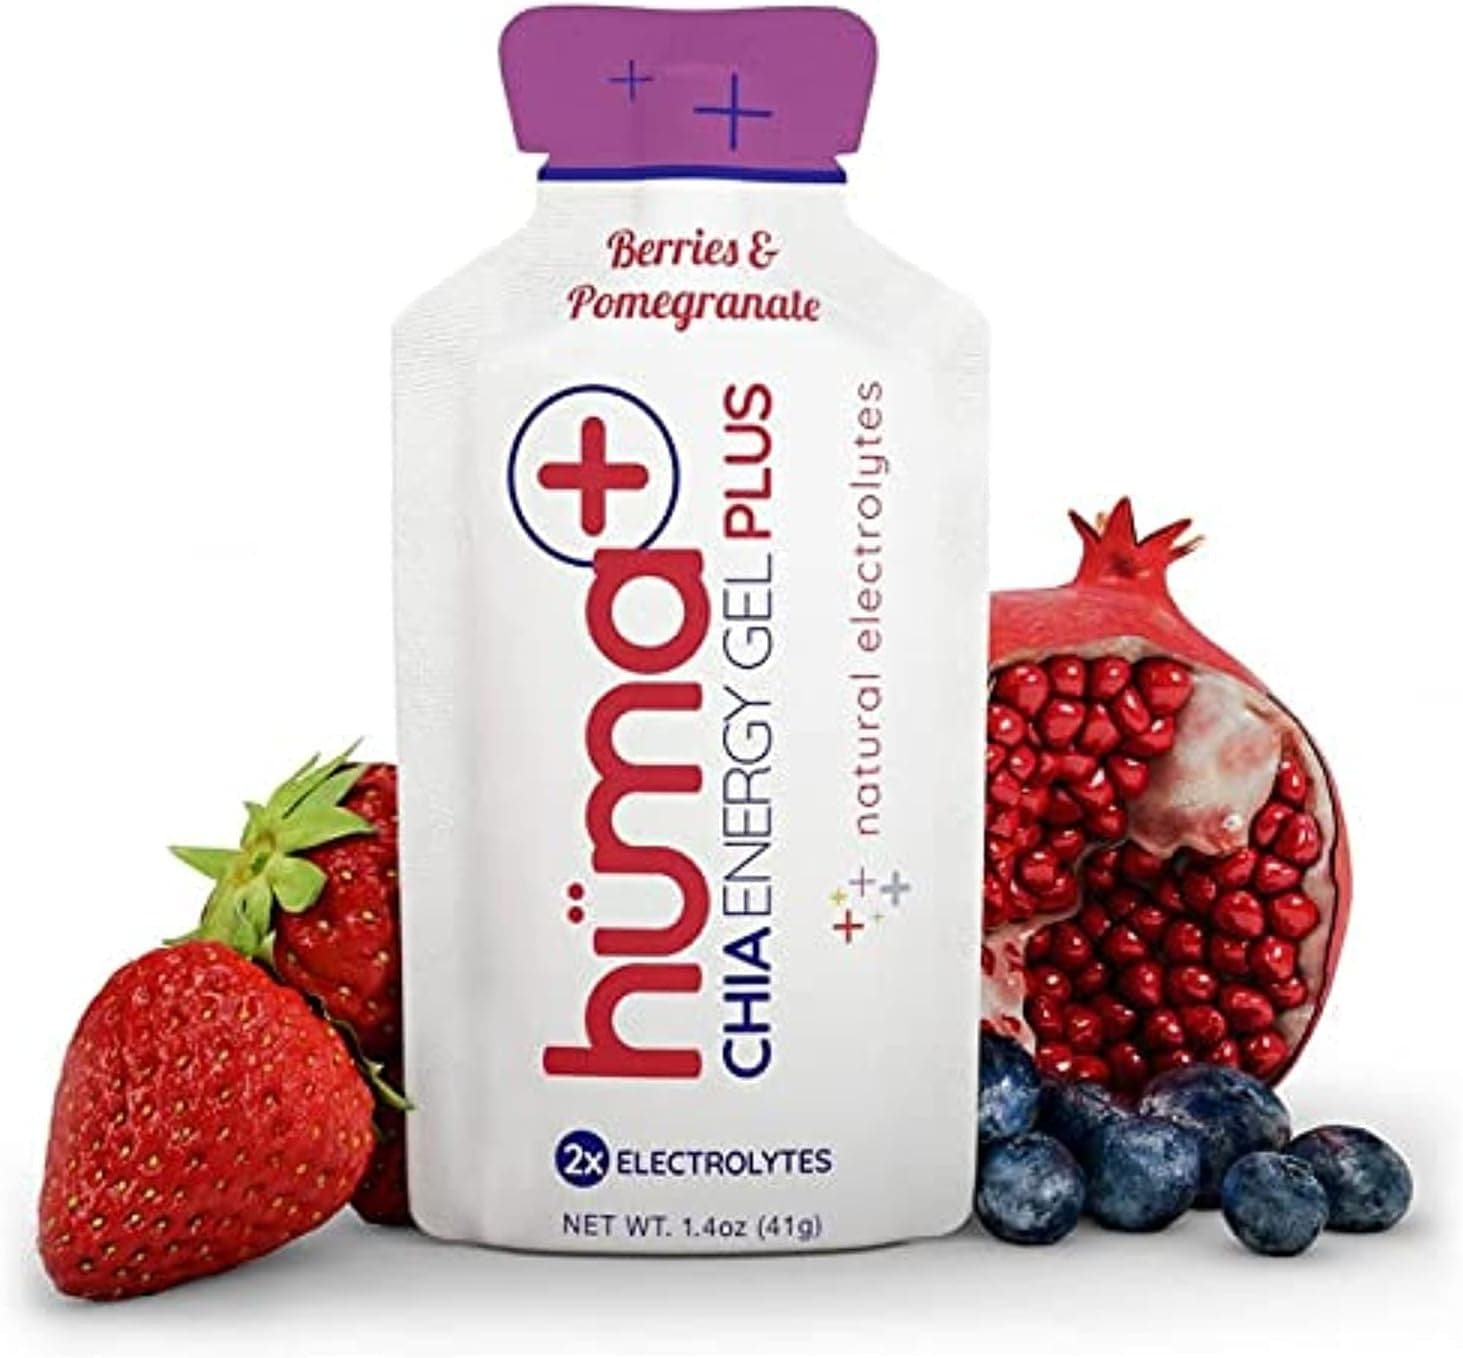 Huma Chia Energy Gel Plus - Berries & Pomegranate - 9 count x 41g - 21gr Carbs, 240mg Sodium, 2x Electrolytes, 100% All Natural, Vegan, Gluten Free, Caffeine Free, No Stomach Problems, Easy Digestion - Athletix.ae